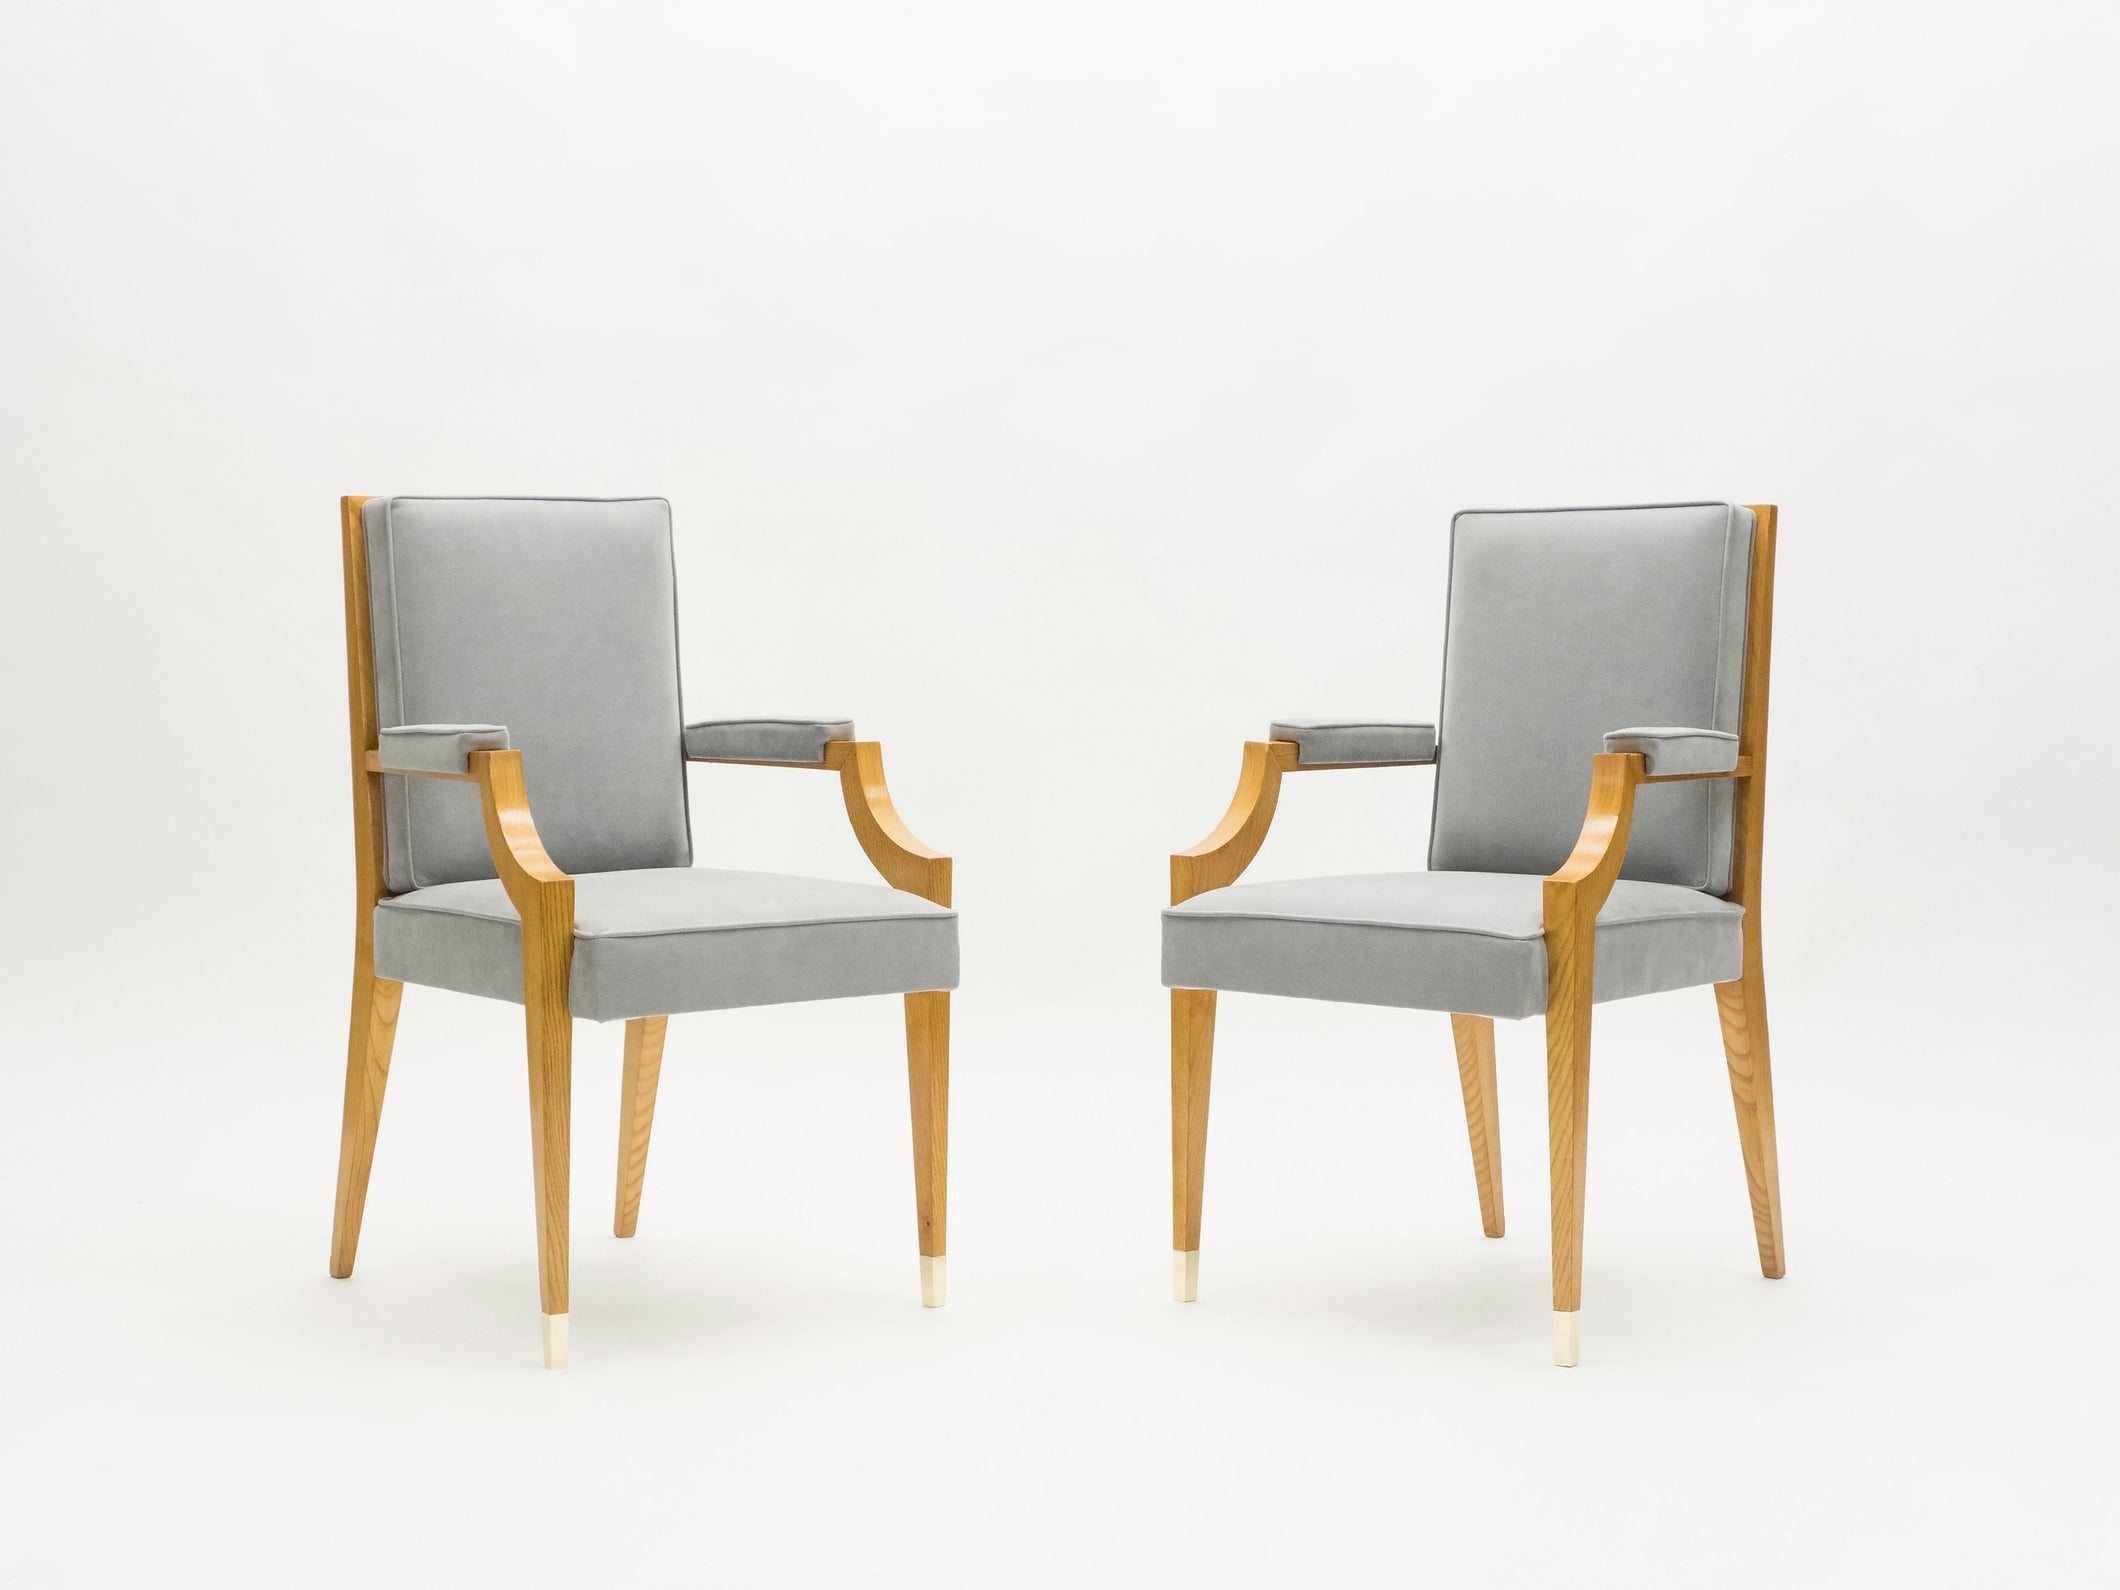 André Arbus pair of ash wood neoclassical armchairs 1940s.